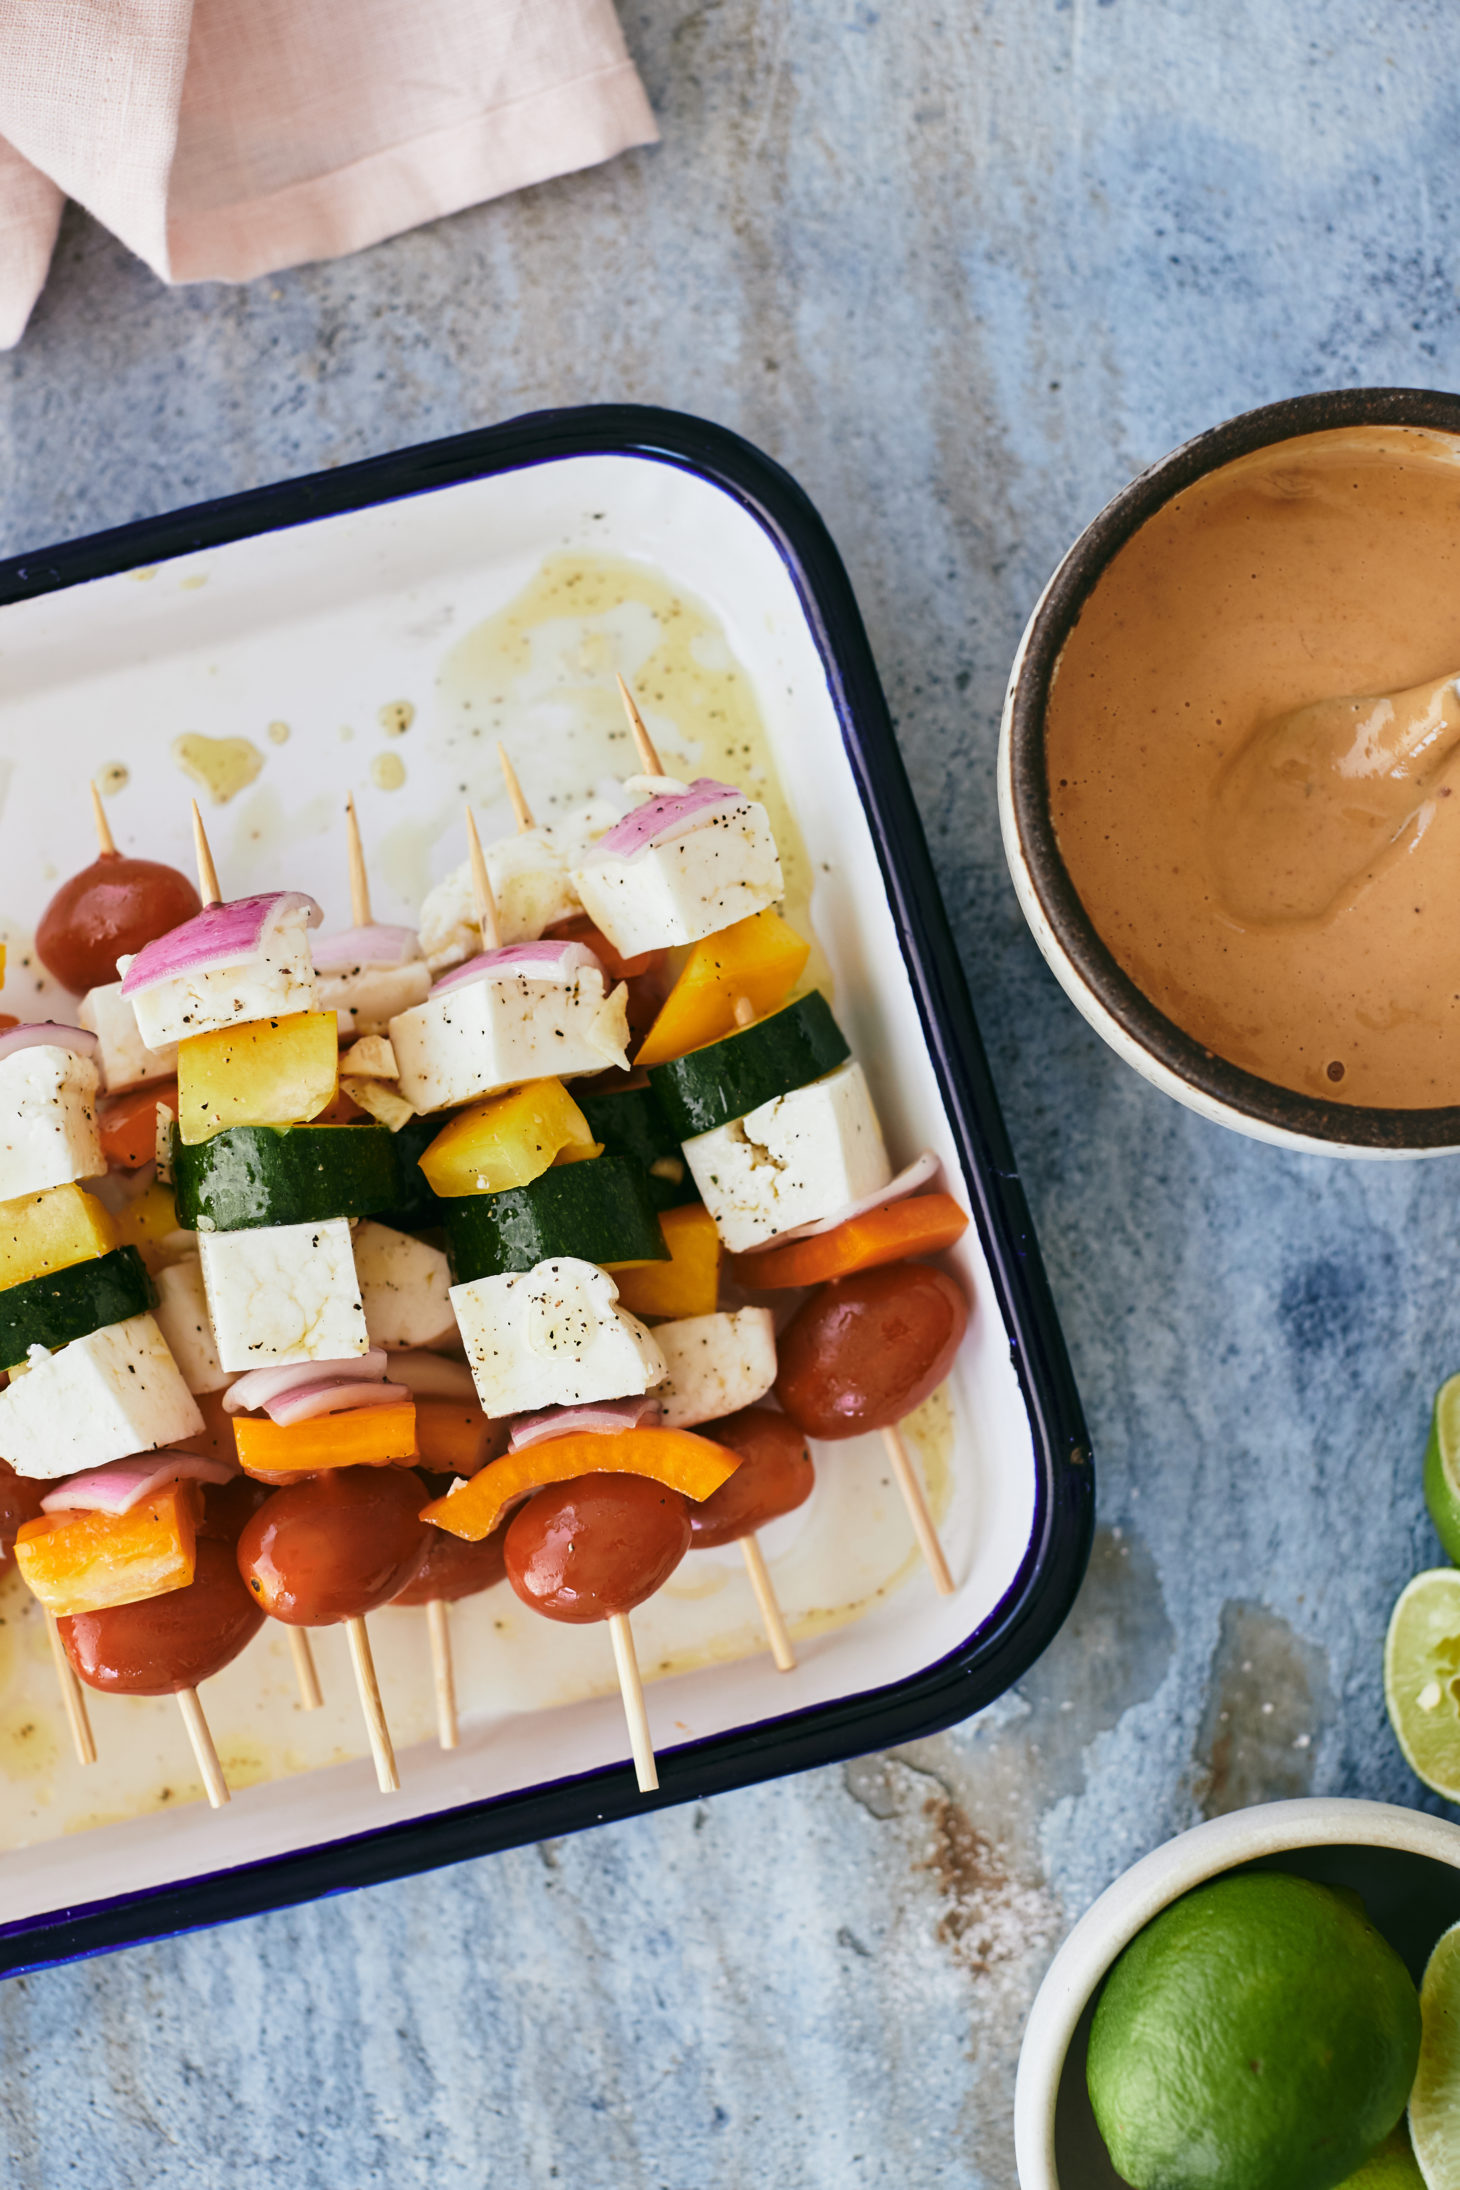 Halloumi and Vegetable skewers with a peanut sauce on the side